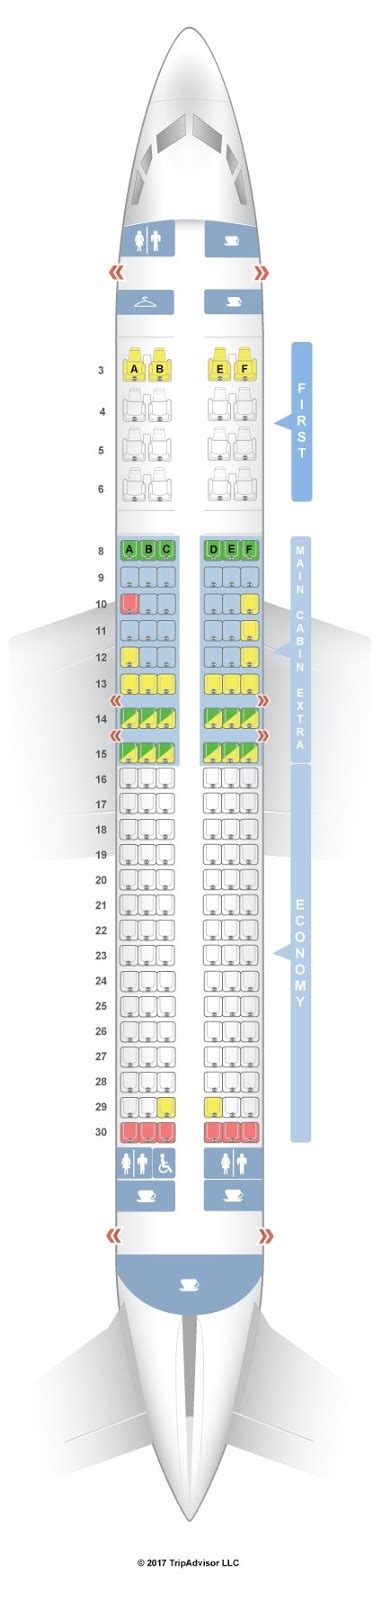 Boeing 737 800 seating chart american airlines. American Airlines operates only 42 Boeings 737 MAX 8. The Boeing 737 MAX 8 is a narrow-body, twin-engine jet airliner manufactured by Boeing. The 737 MAX 8 has a range of up to 3,850 nautical miles and can seat up to 172 passengers in a typical two-class configuration. The 737 MAX 8 also has a spacious and comfortable cabin, with large windows ... 